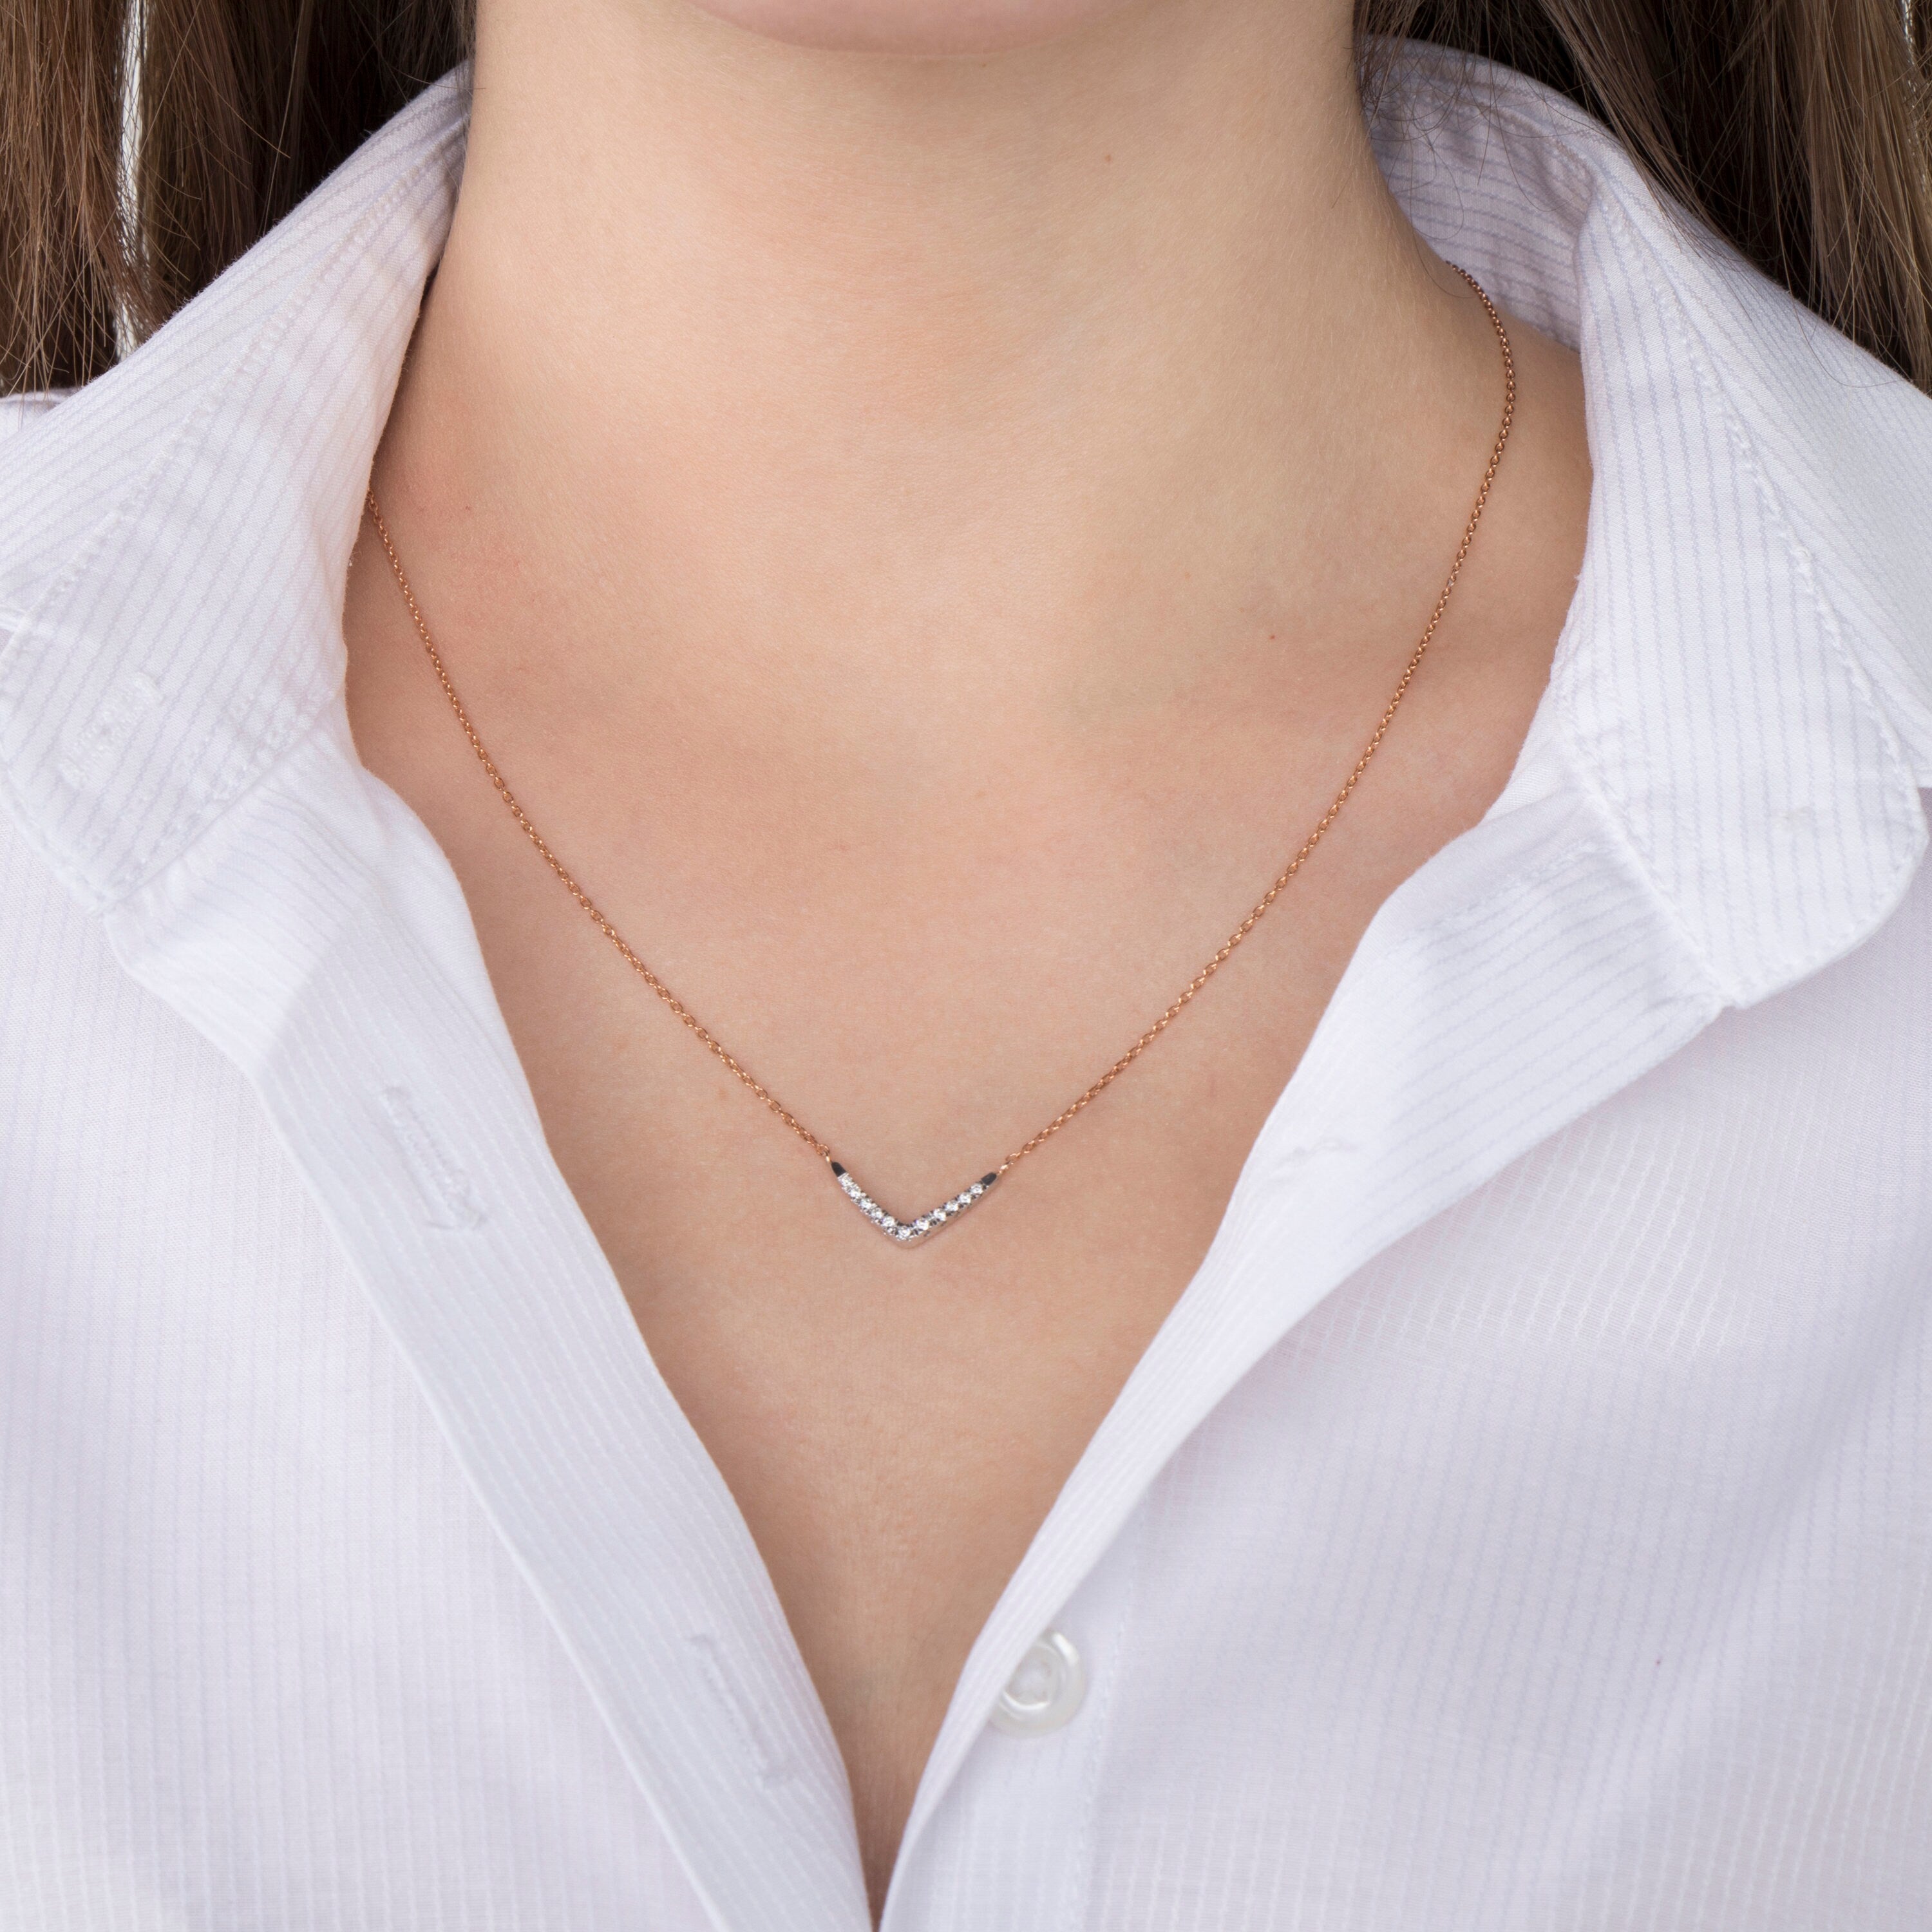 Diamond Chevron Necklace Available in 14K and 18K Gold